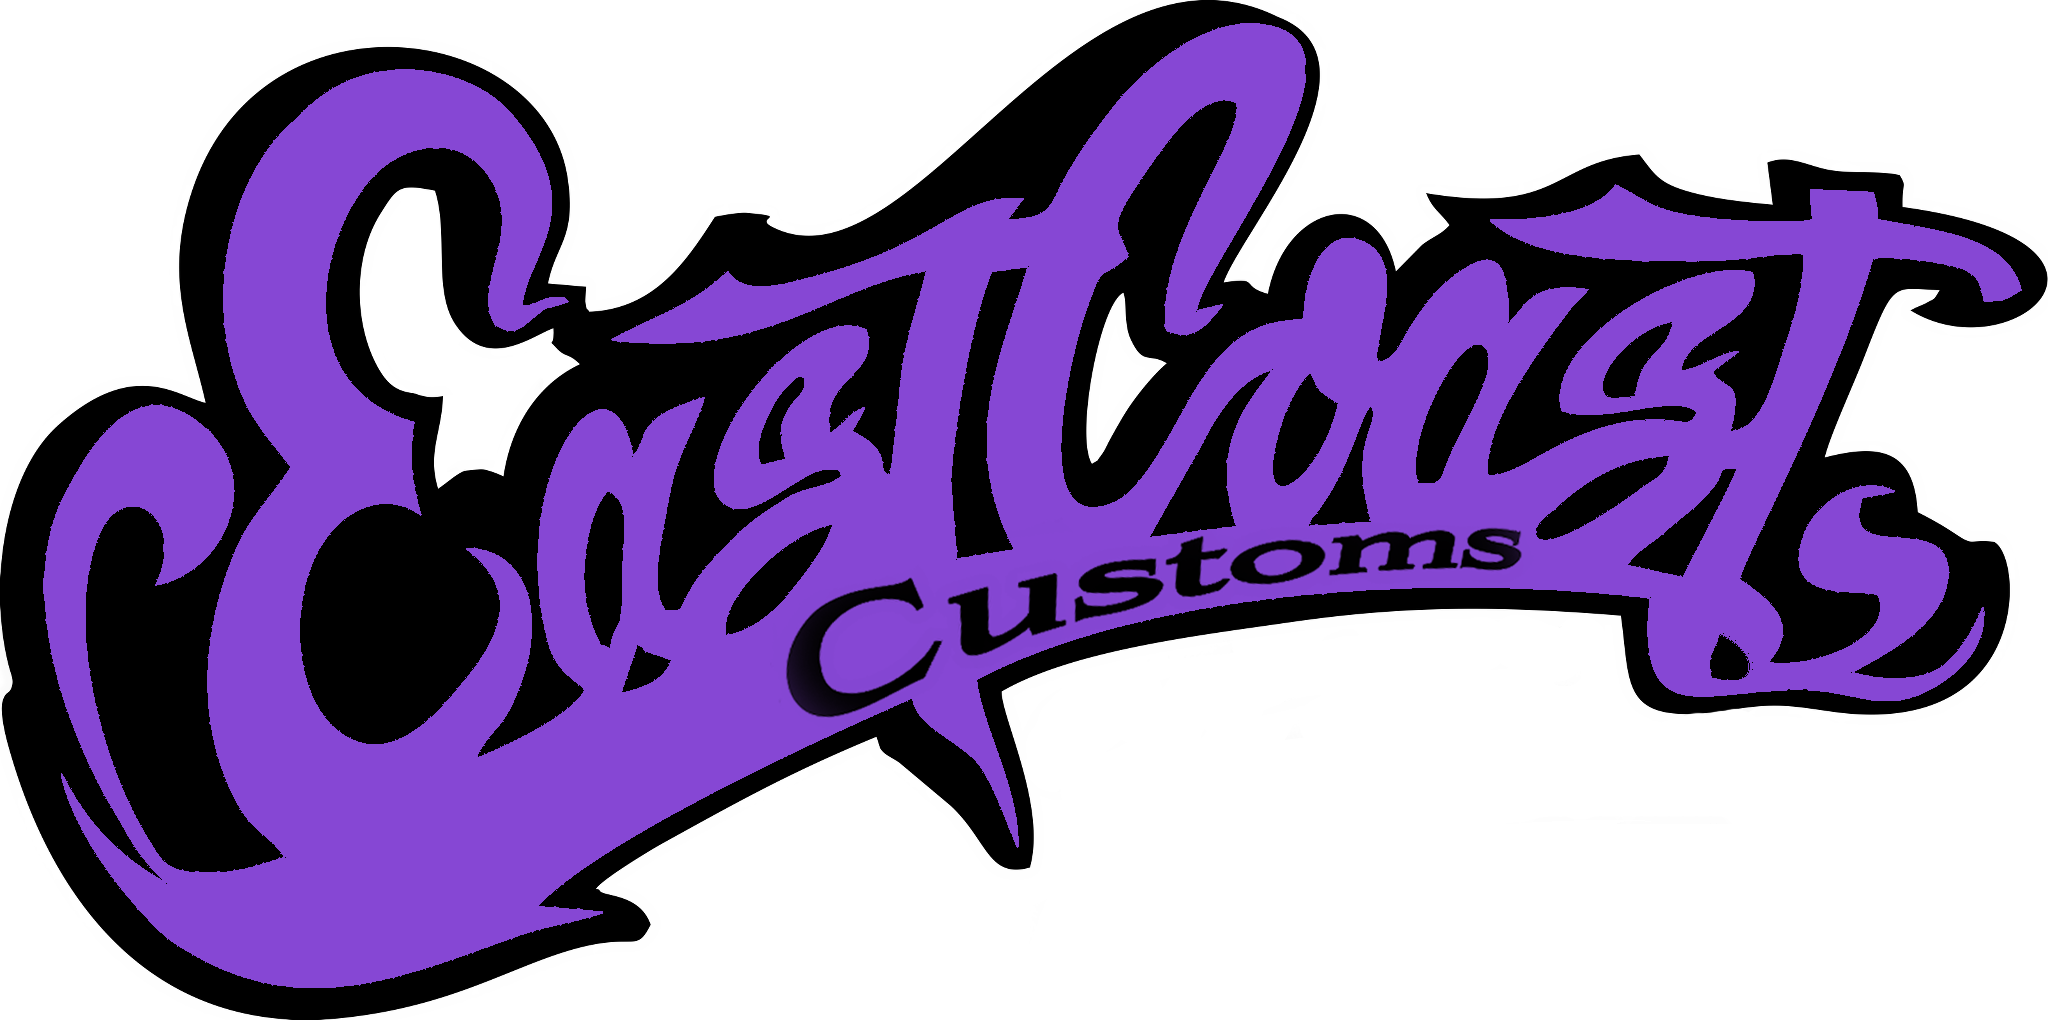 east-coast-customs-purple-clear-background.png